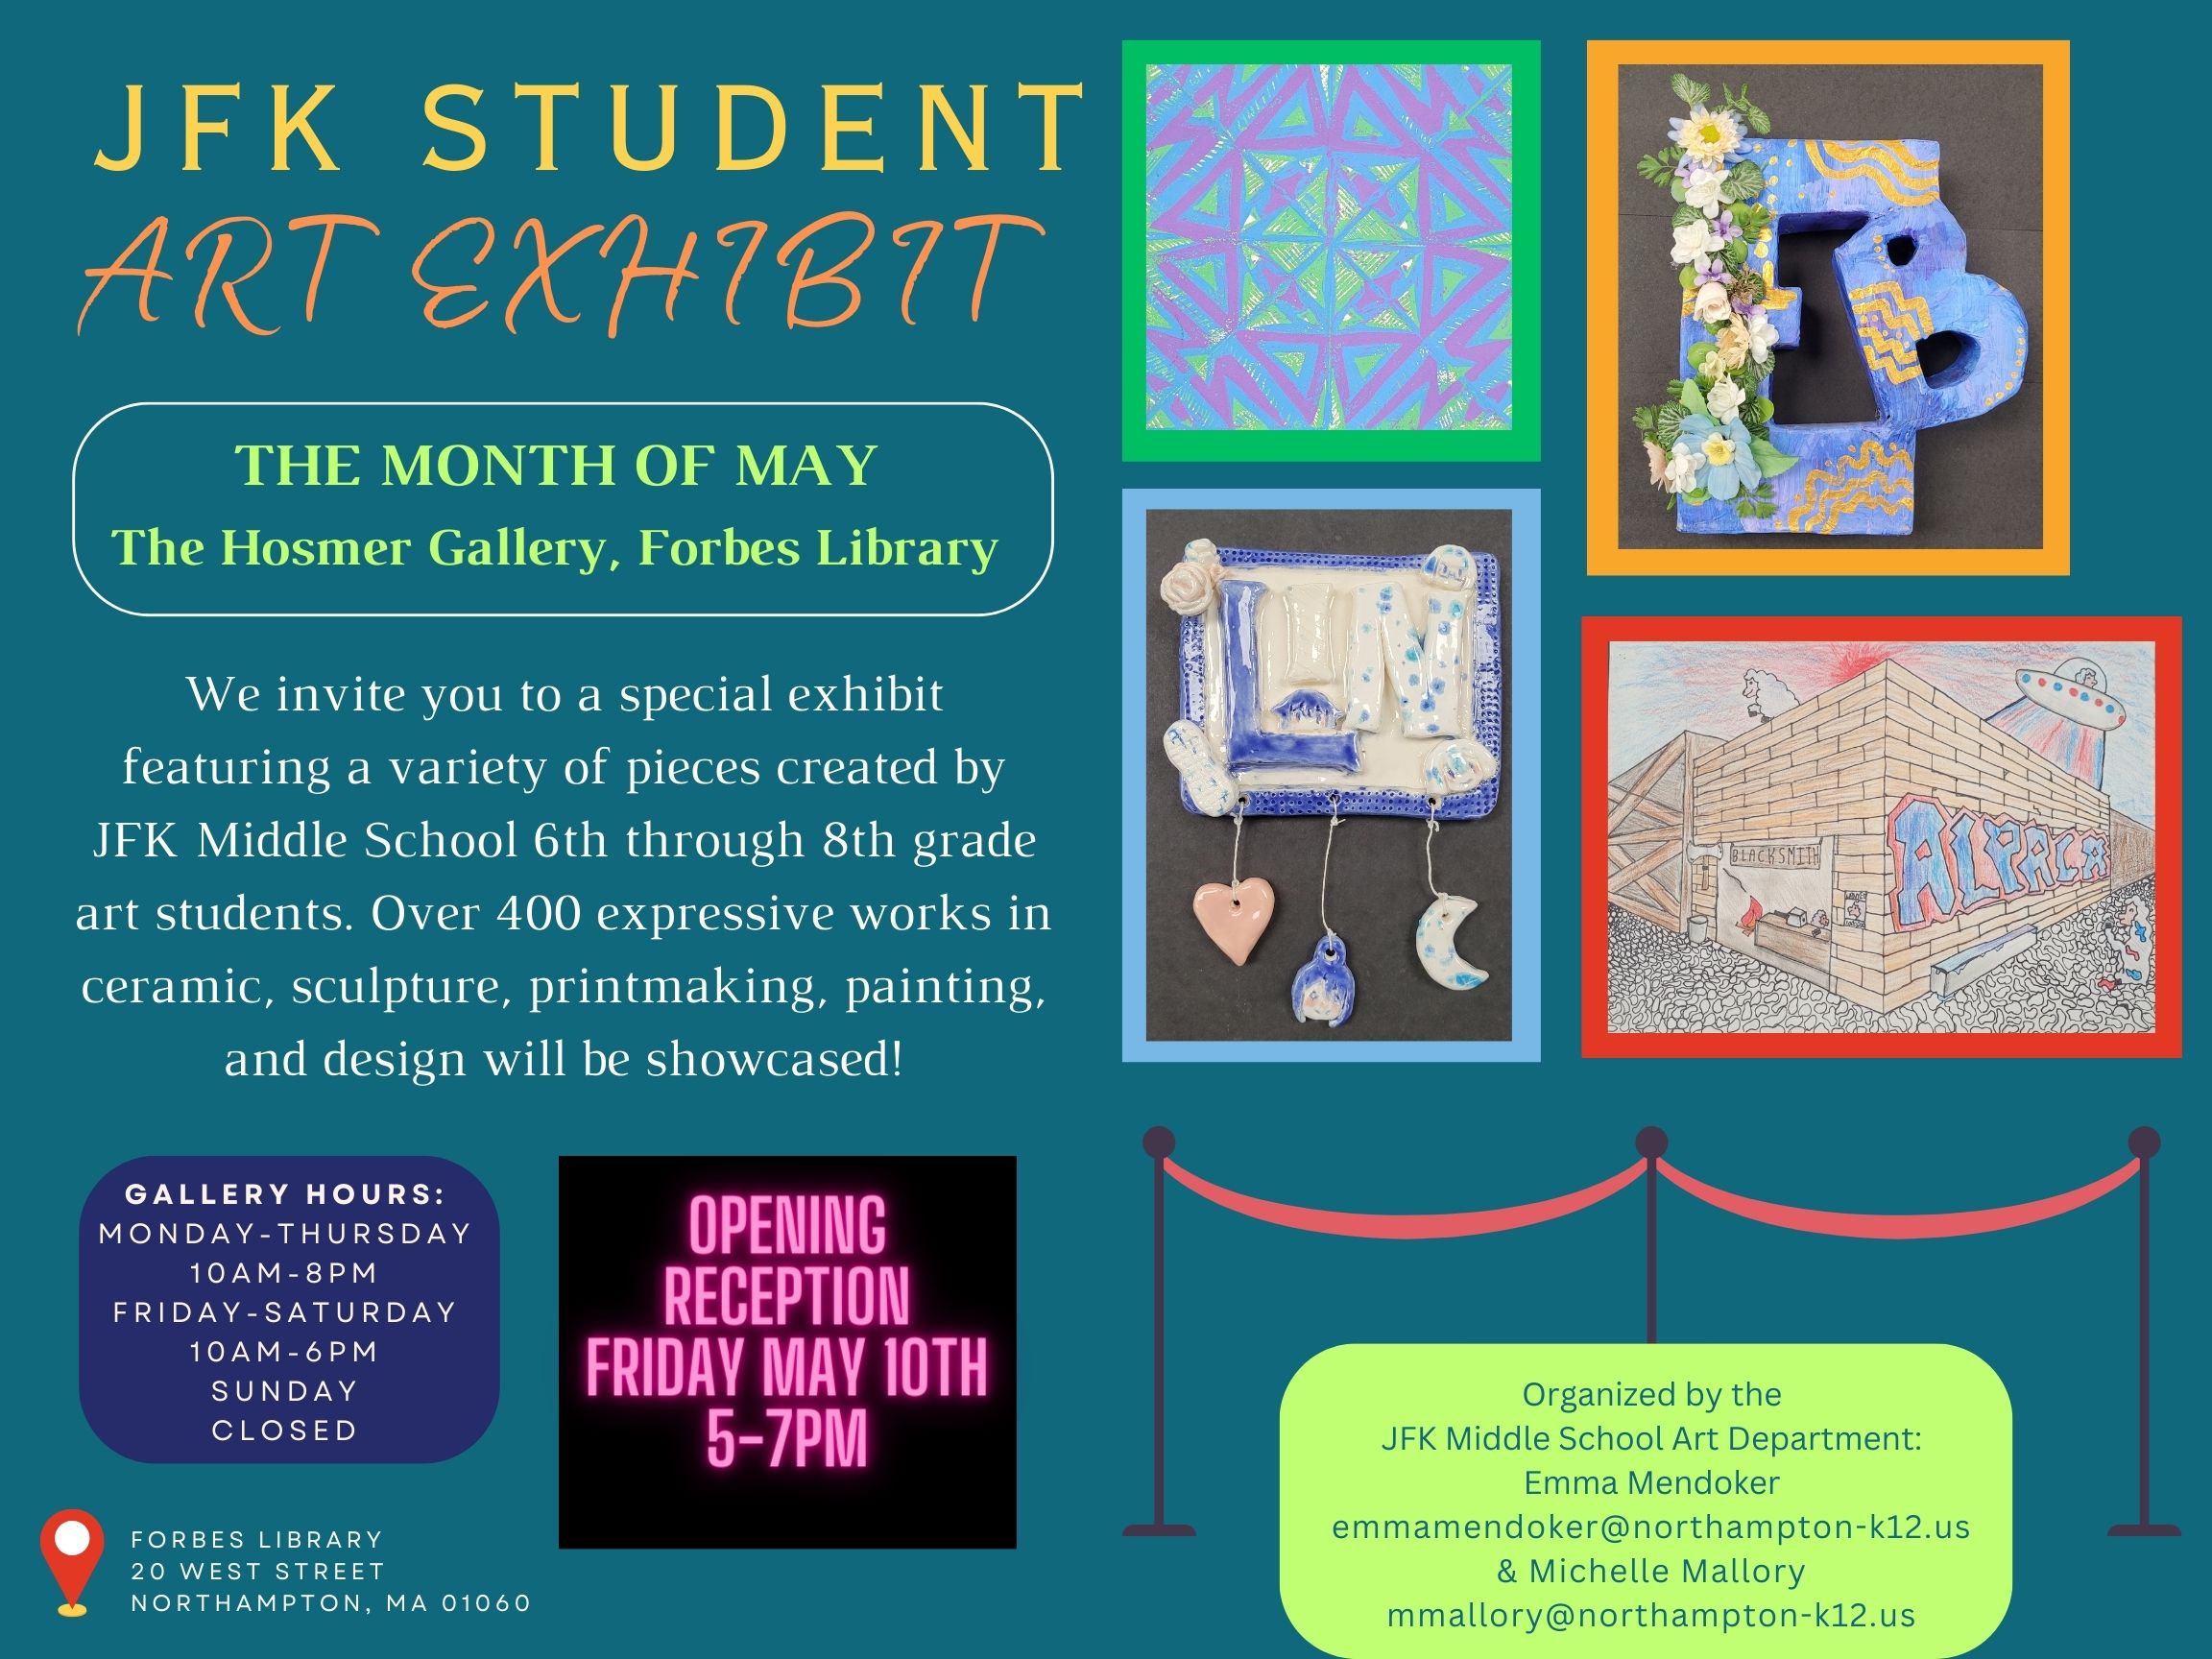 The JFK Student Art Show. May 2-30, 2024. Reception: Friday May 10, 5-7 PM. We invite you to a special exhibit featuring a variety of pieces created by JFK Middle School 6th through 8th grade art students. Over 400 expressive works in ceramic, sculpture, printmaking, painting, and design will be showcased!